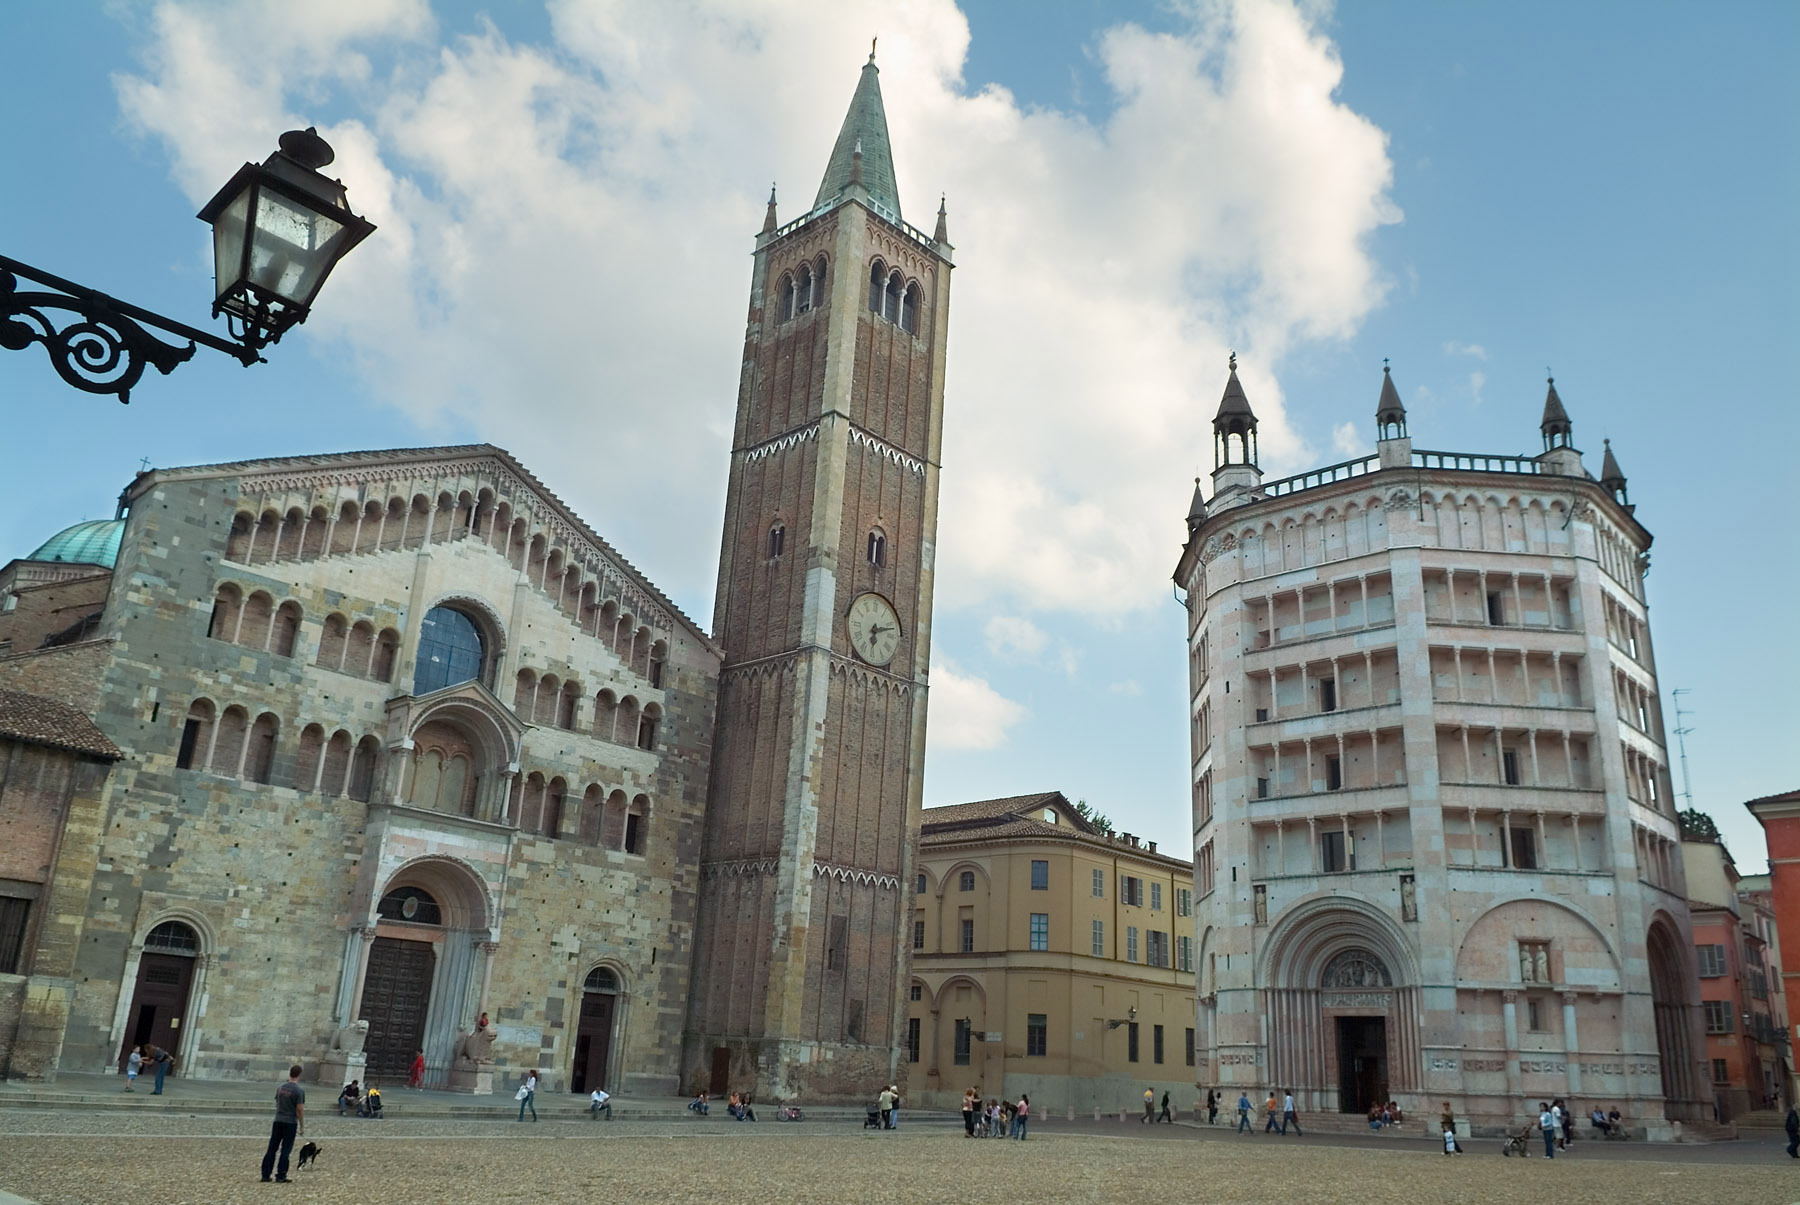 Clock tower in Parma, Italy wallpapers and images - wallpapers 